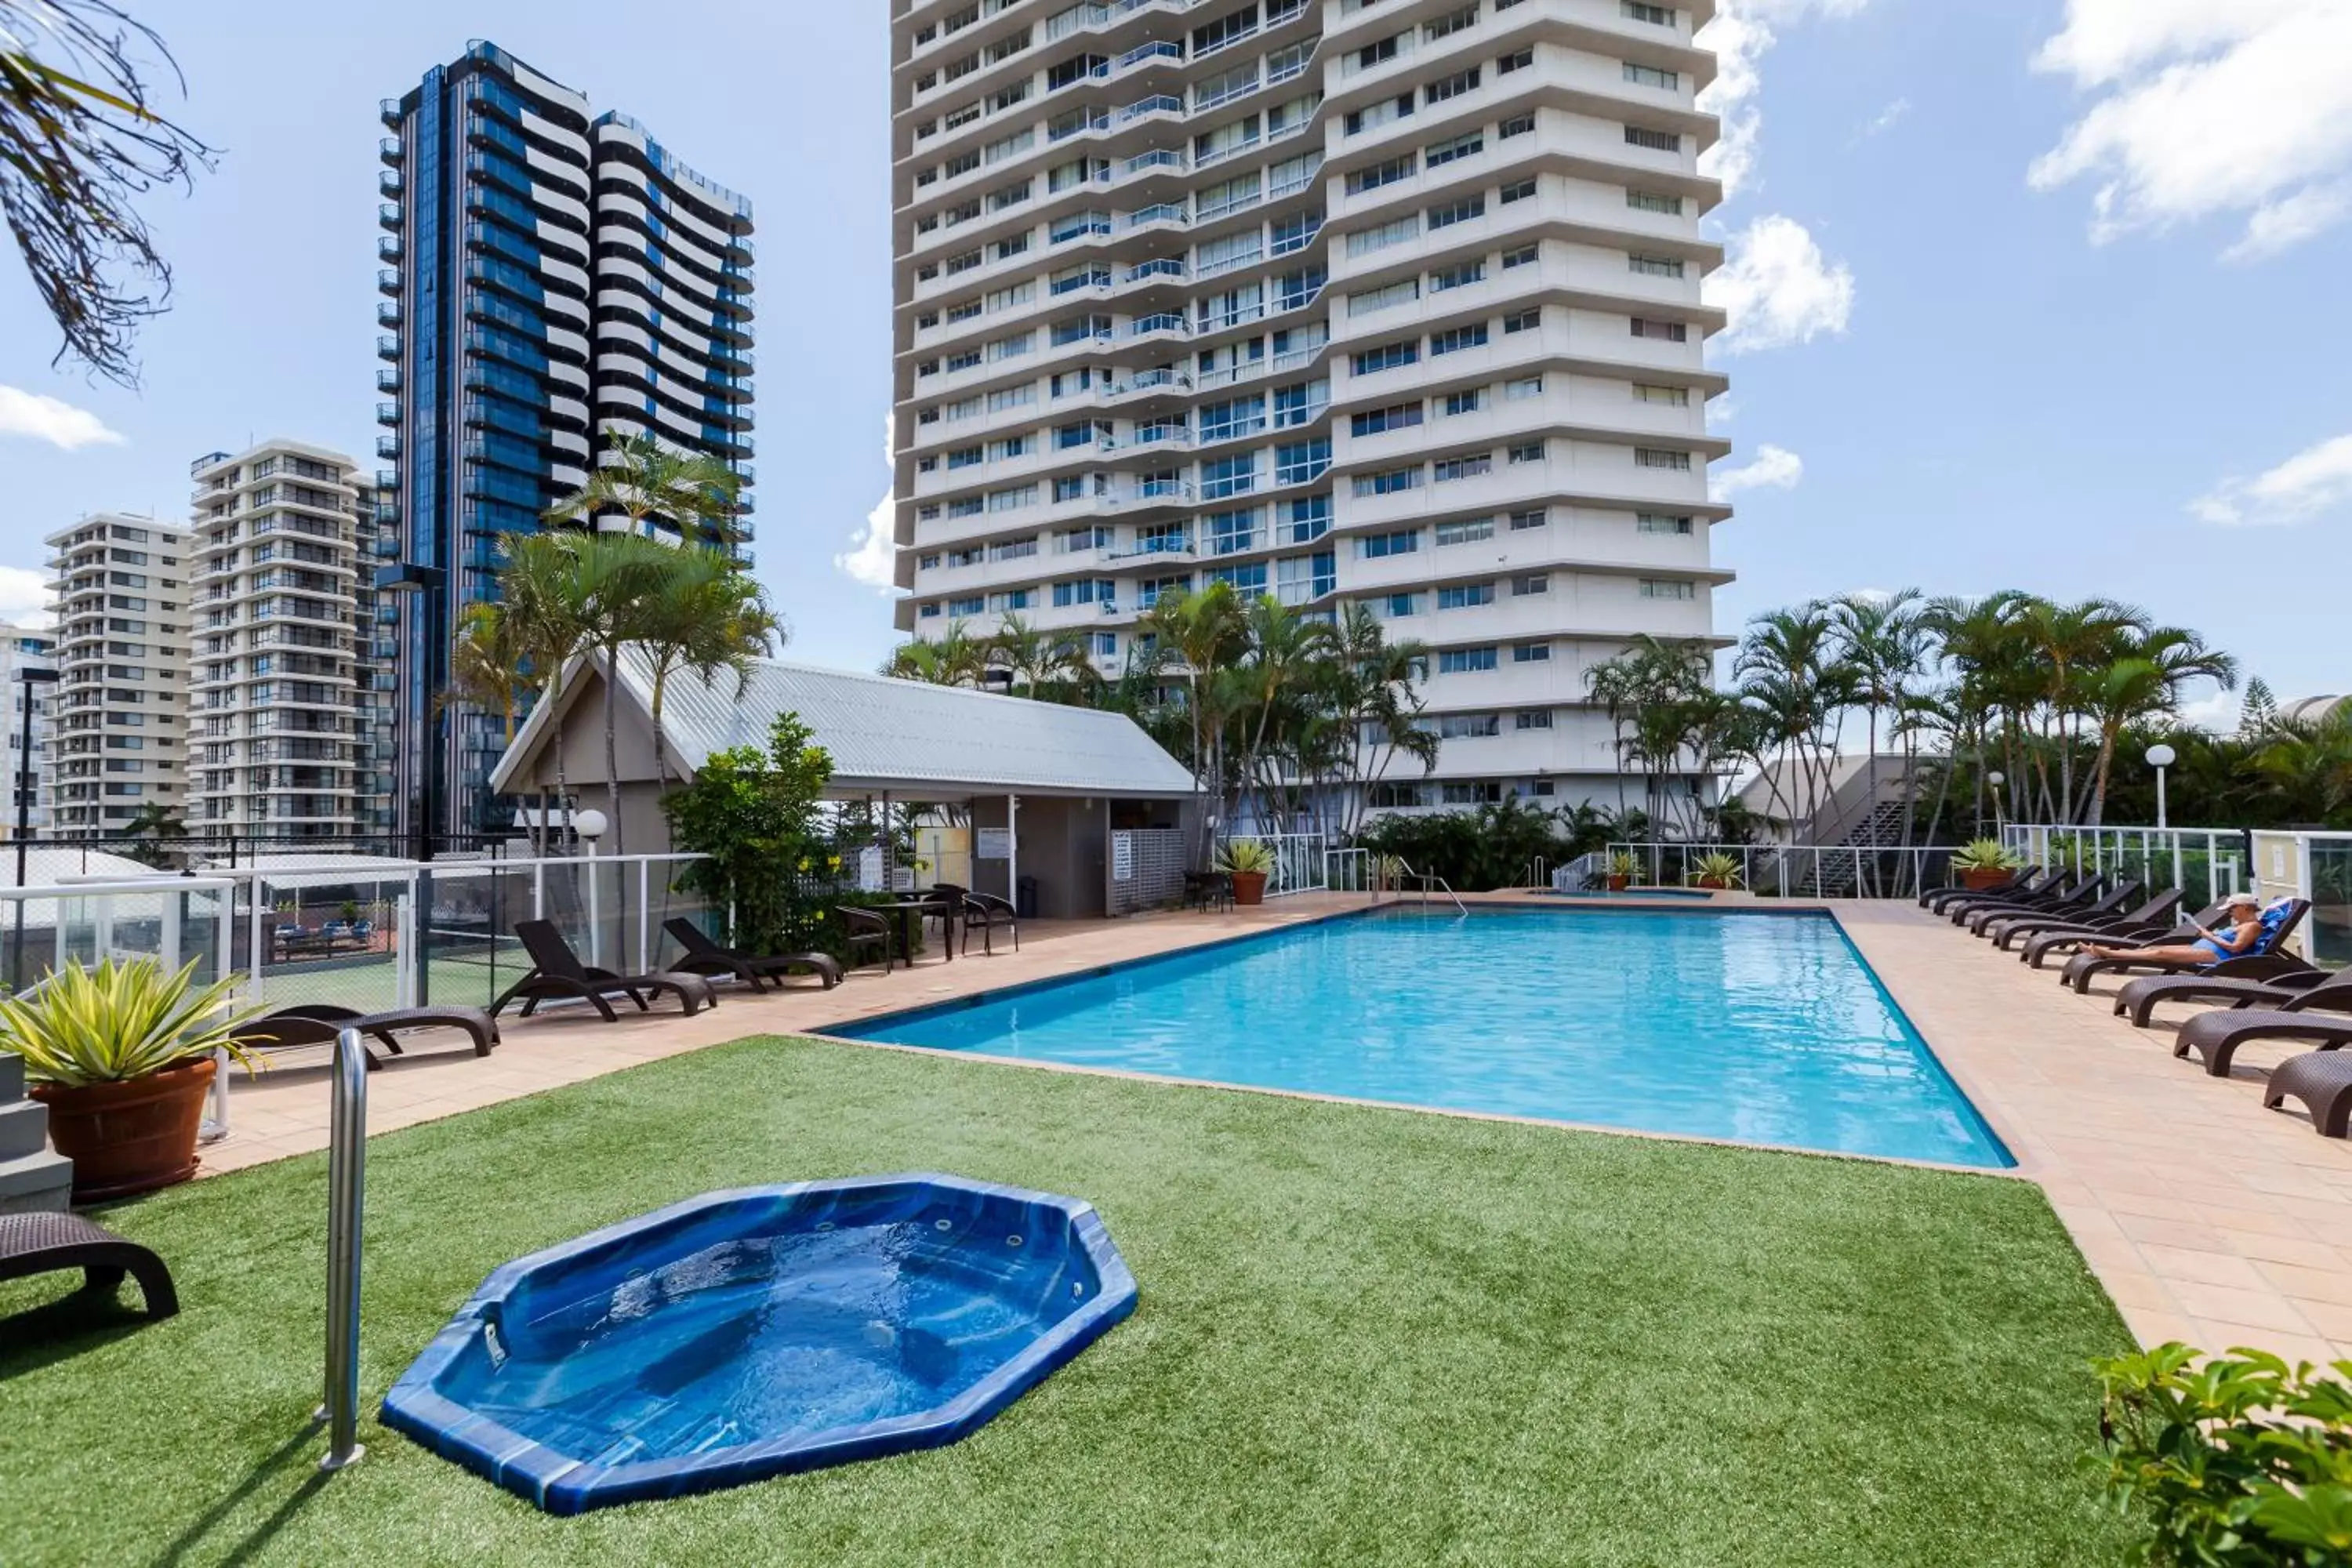 Swimming Pool in Points North Apartments